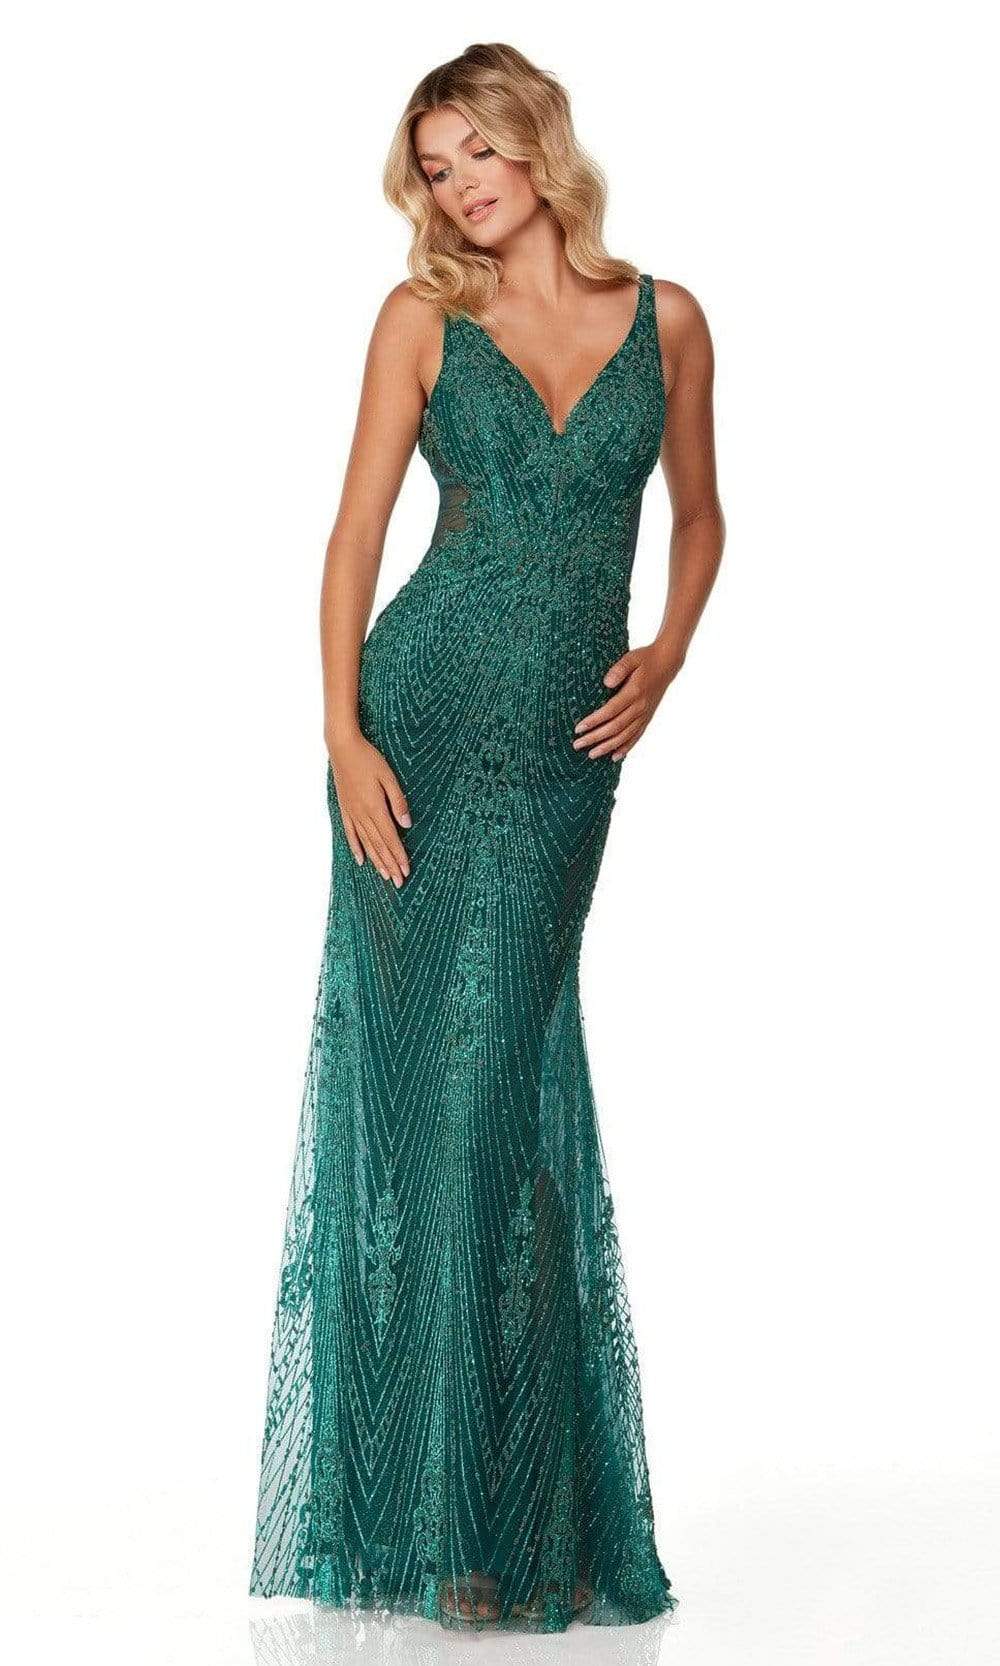 Alyce Paris - 61199 Glitter Detailed Gown Special Occasion Dress